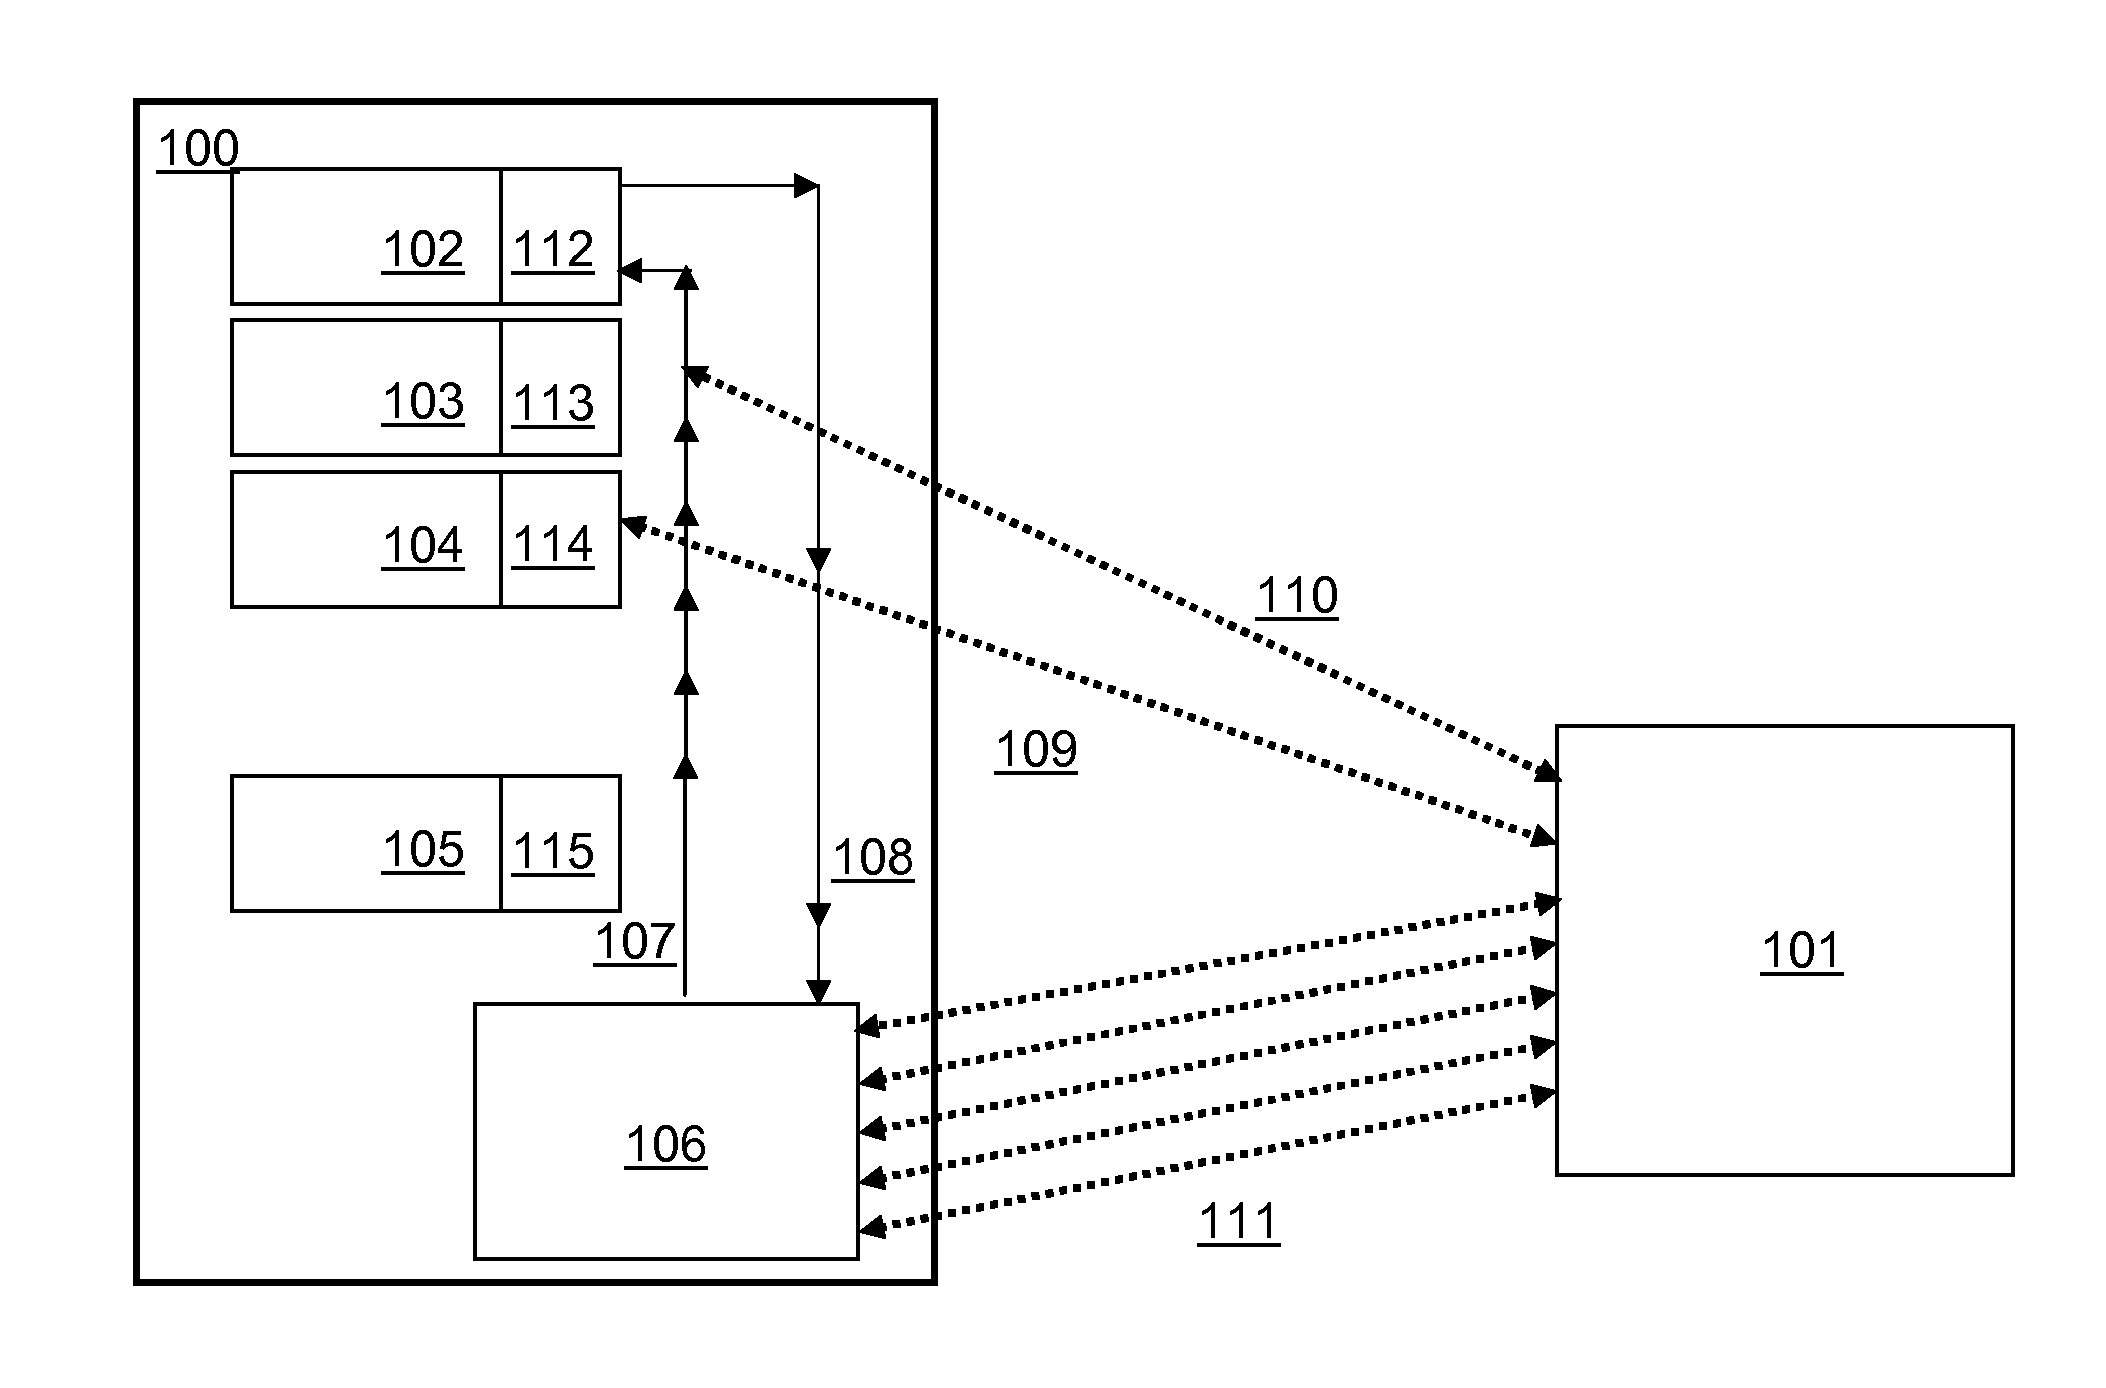 Method for Providing Connections for Application Processes to a Database Server